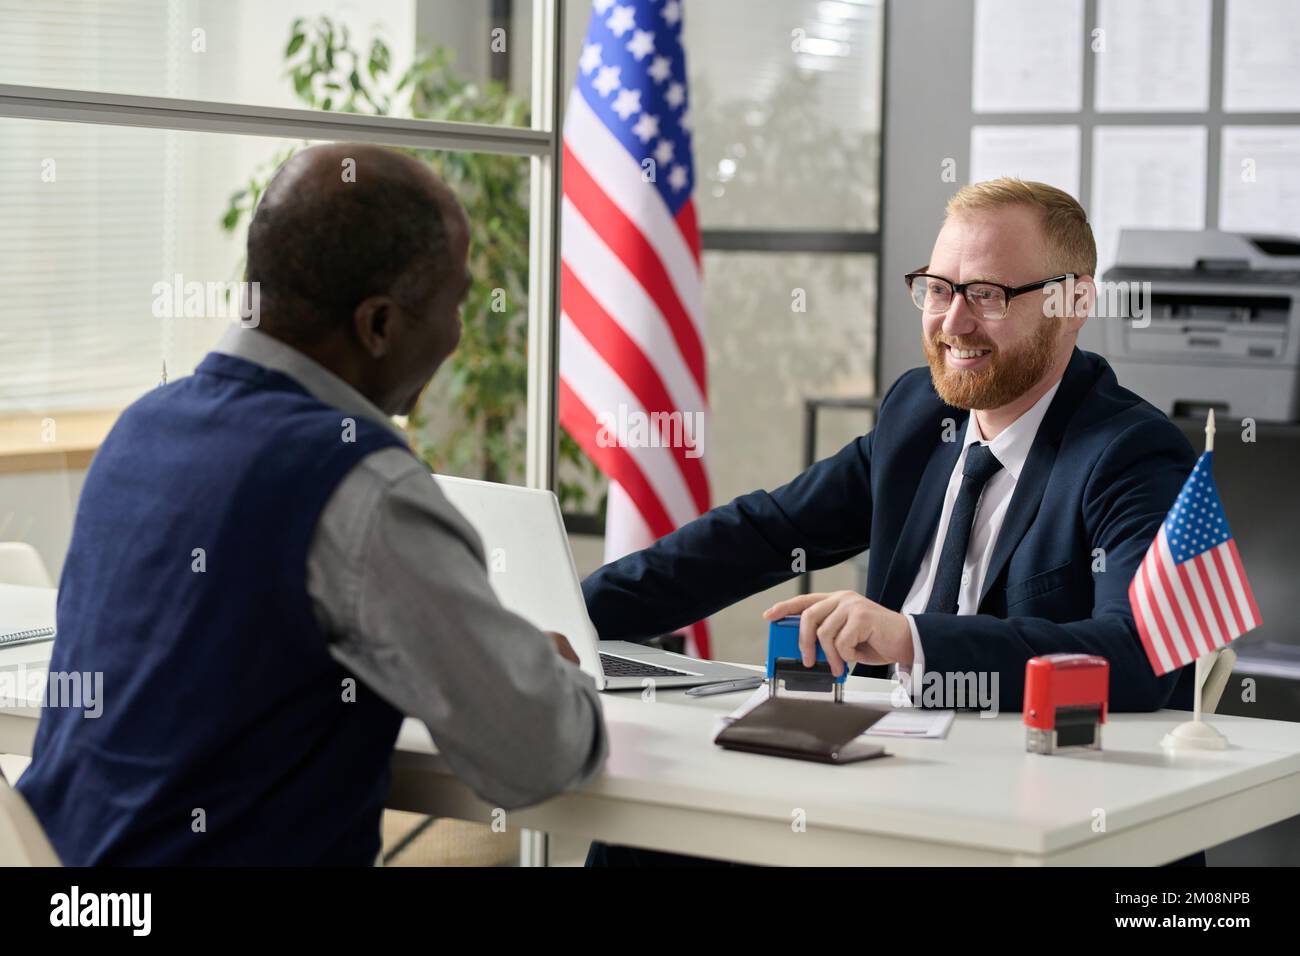 Portrait of friendly smiling worker consulting senior black man in US immigration office Stock Photo